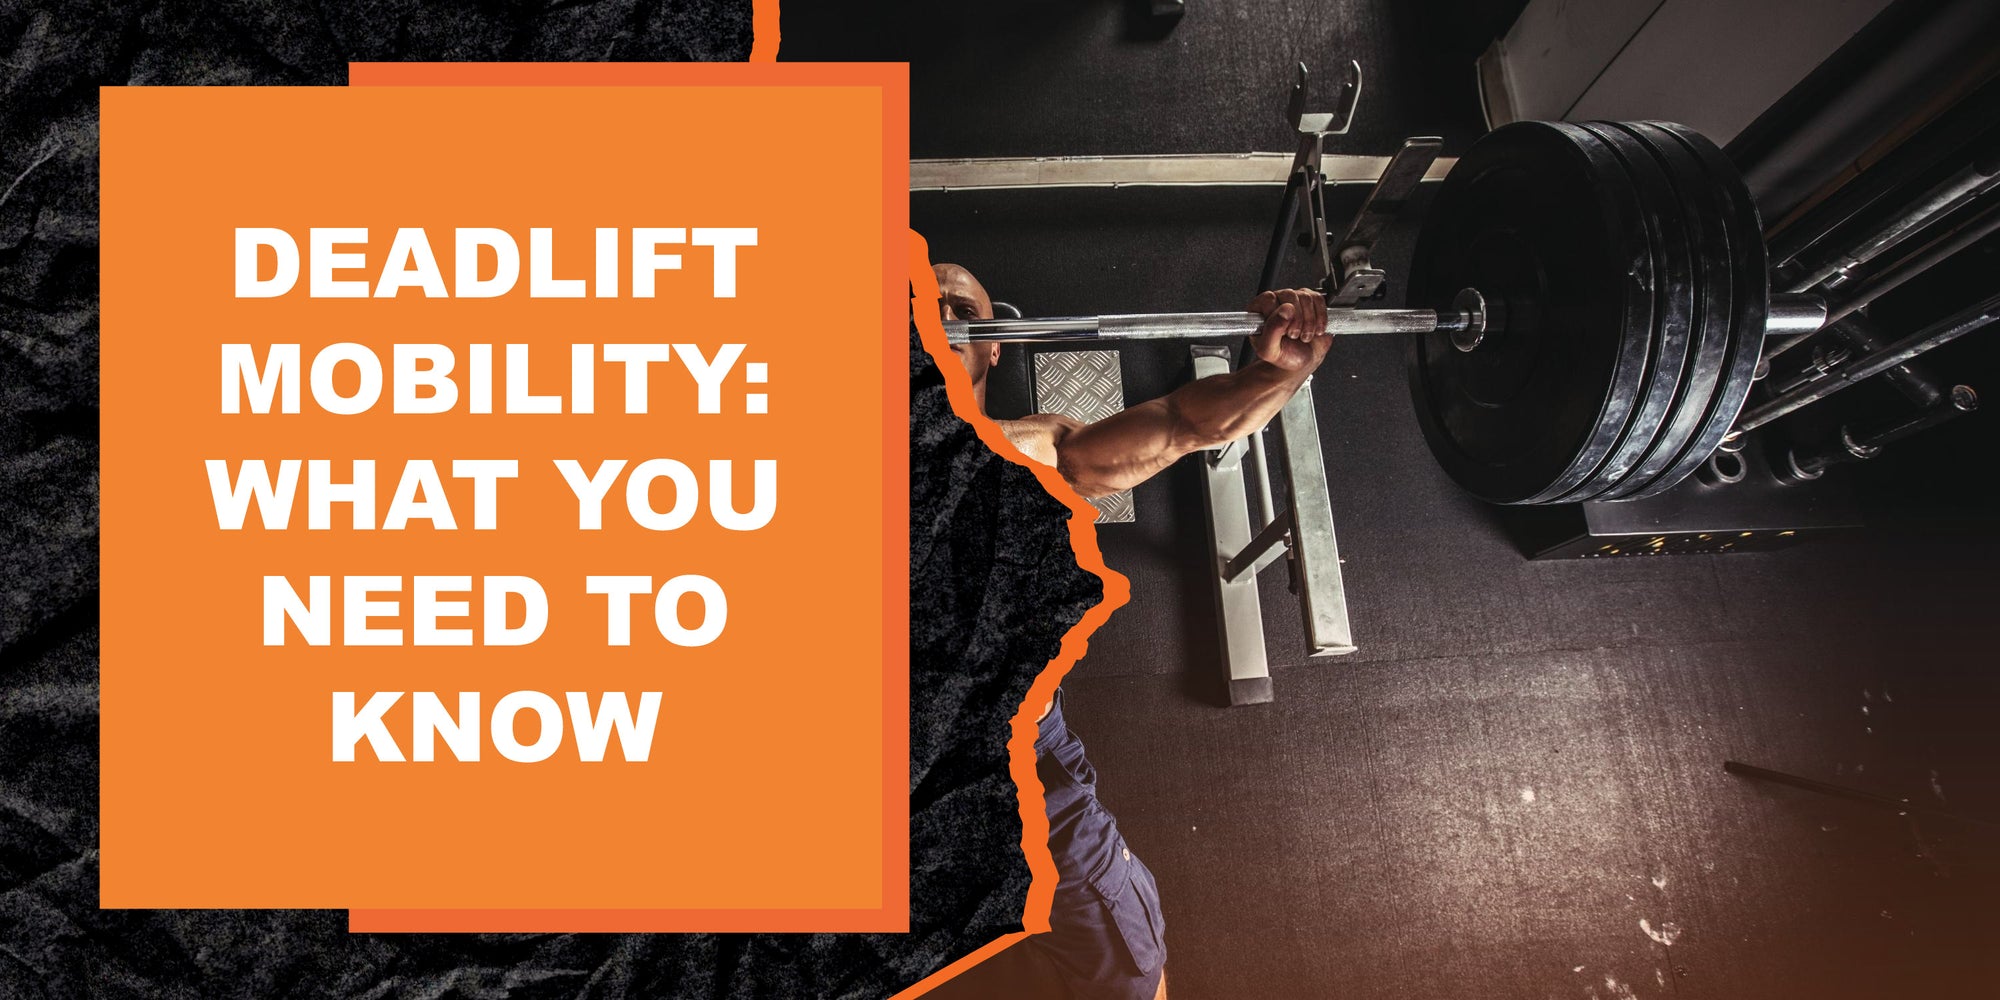 Deadlift Mobility: What You Need to Know